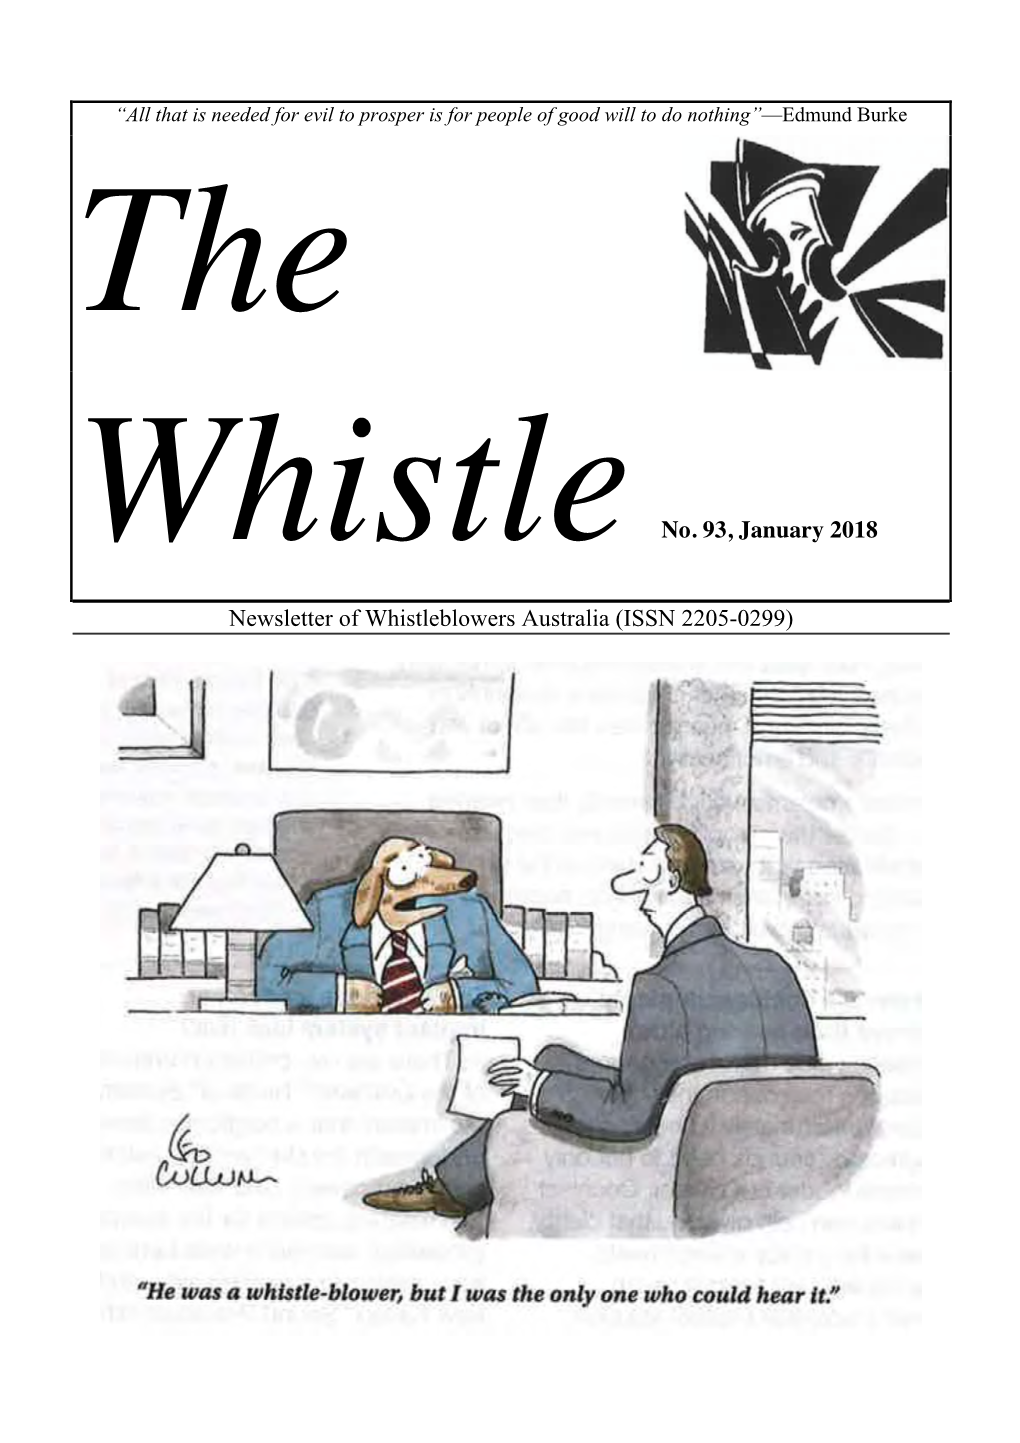 The Whistle, January 2018